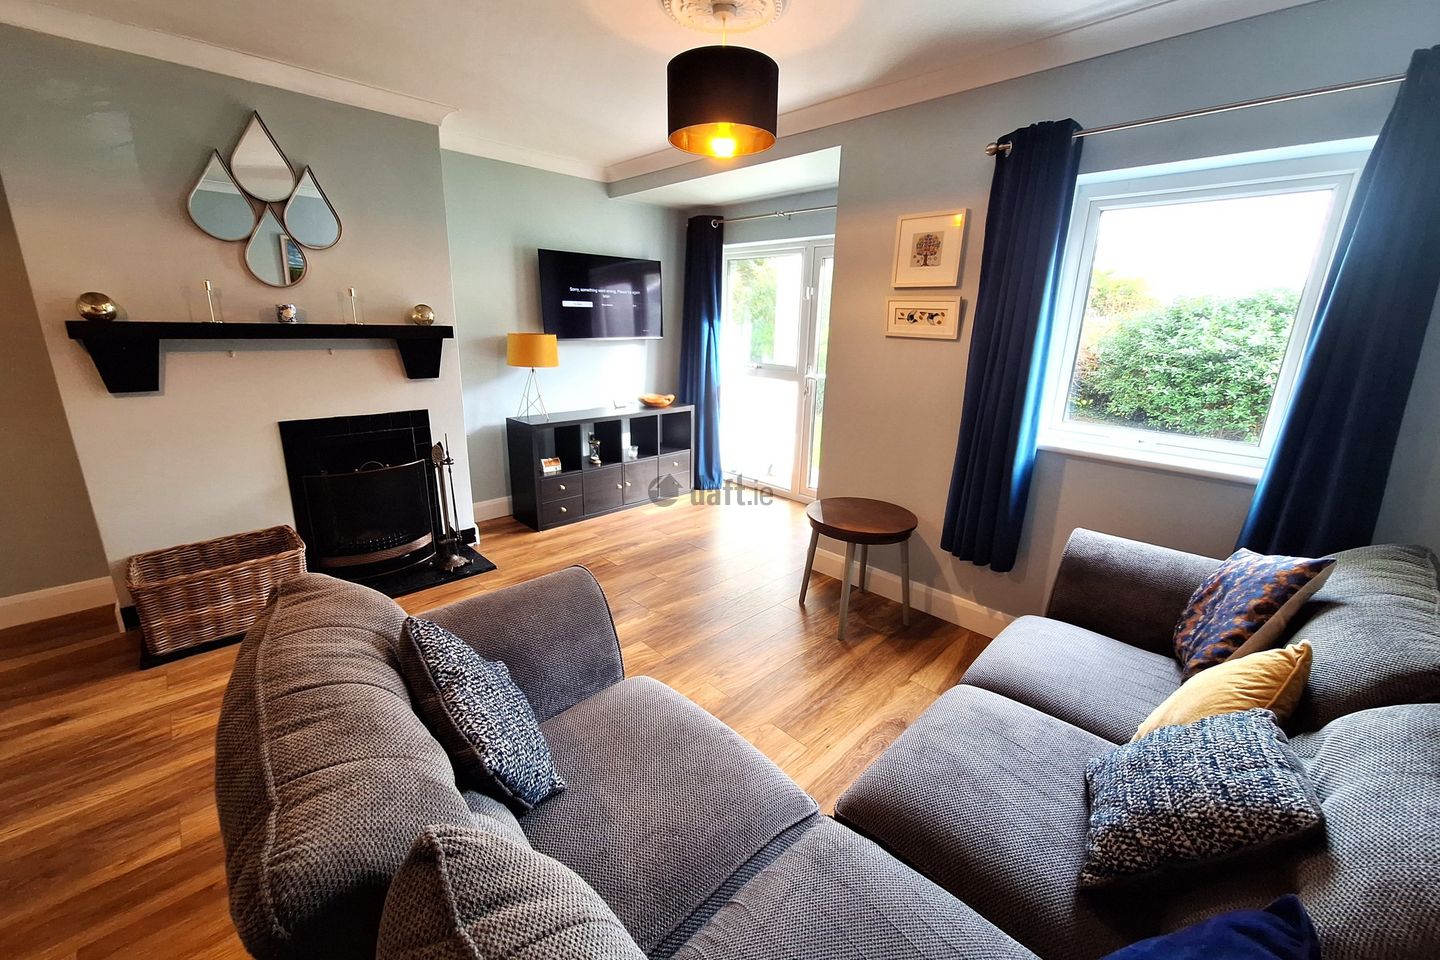 Apartment 13, Cuan Na Coille, Salthill, Co. Galway